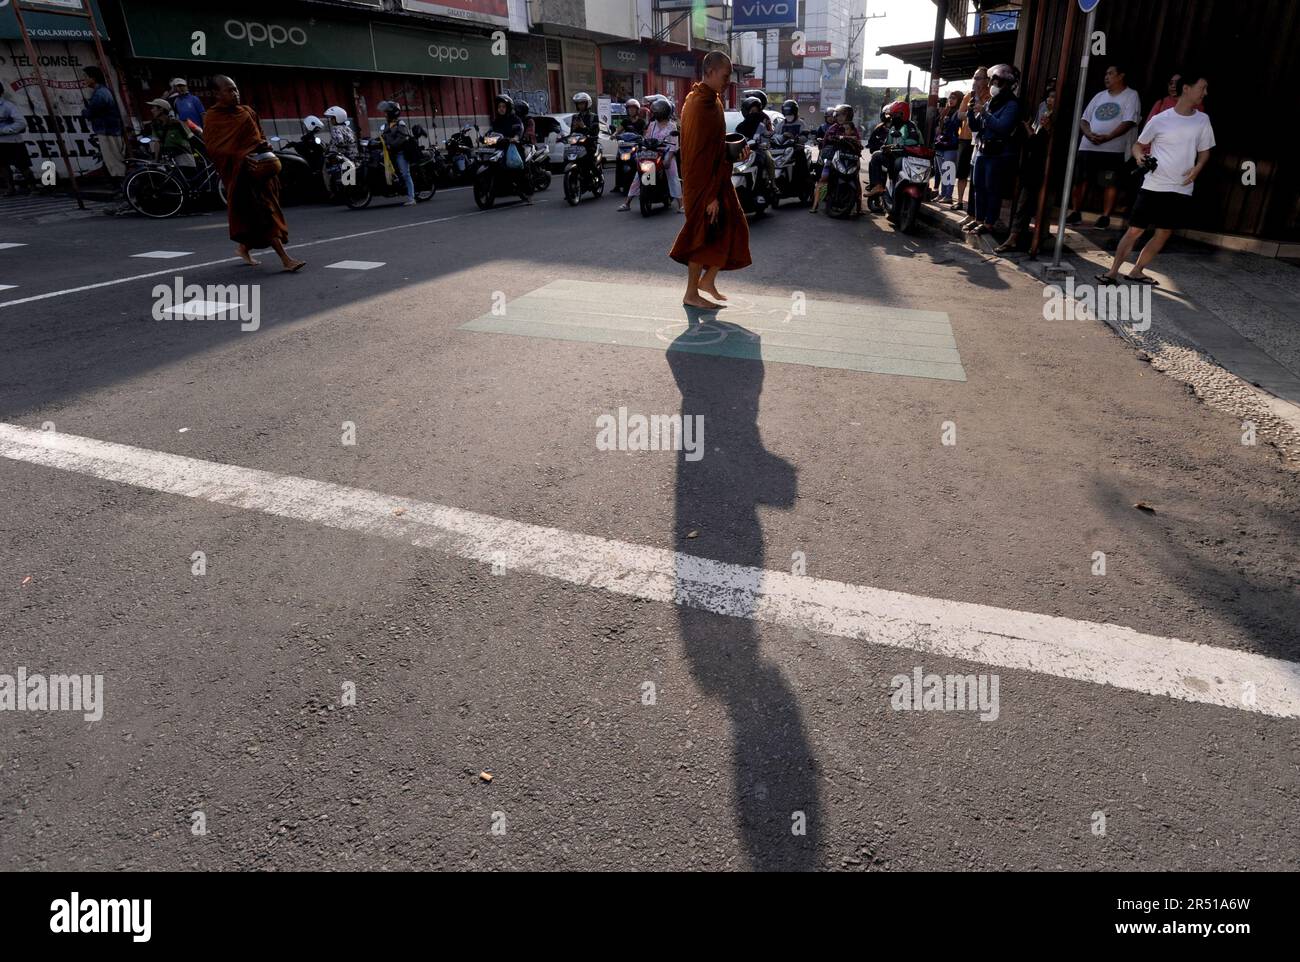 May 31, 2023, Magelang, Central Java, Indonesia: Monks from Thailand, Singapore, Malaysia, Indonesia who perform the Thudong ritual on foot to Borobudur Temple, go for alms at the Liong Hok Bio Temple in Magelang, Central Java, on May 31 2023. In Magelang City, the monks received a friendly welcome from the locals. around waiting on the side of the road for the Pindapata tradition which was stopped for 3 years, Pindapata is a Buddhist tradition of giving alms to monks or priests in the form of food, money, and various daily needs. The 32 monks are scheduled to continue their final journey to B Stock Photo